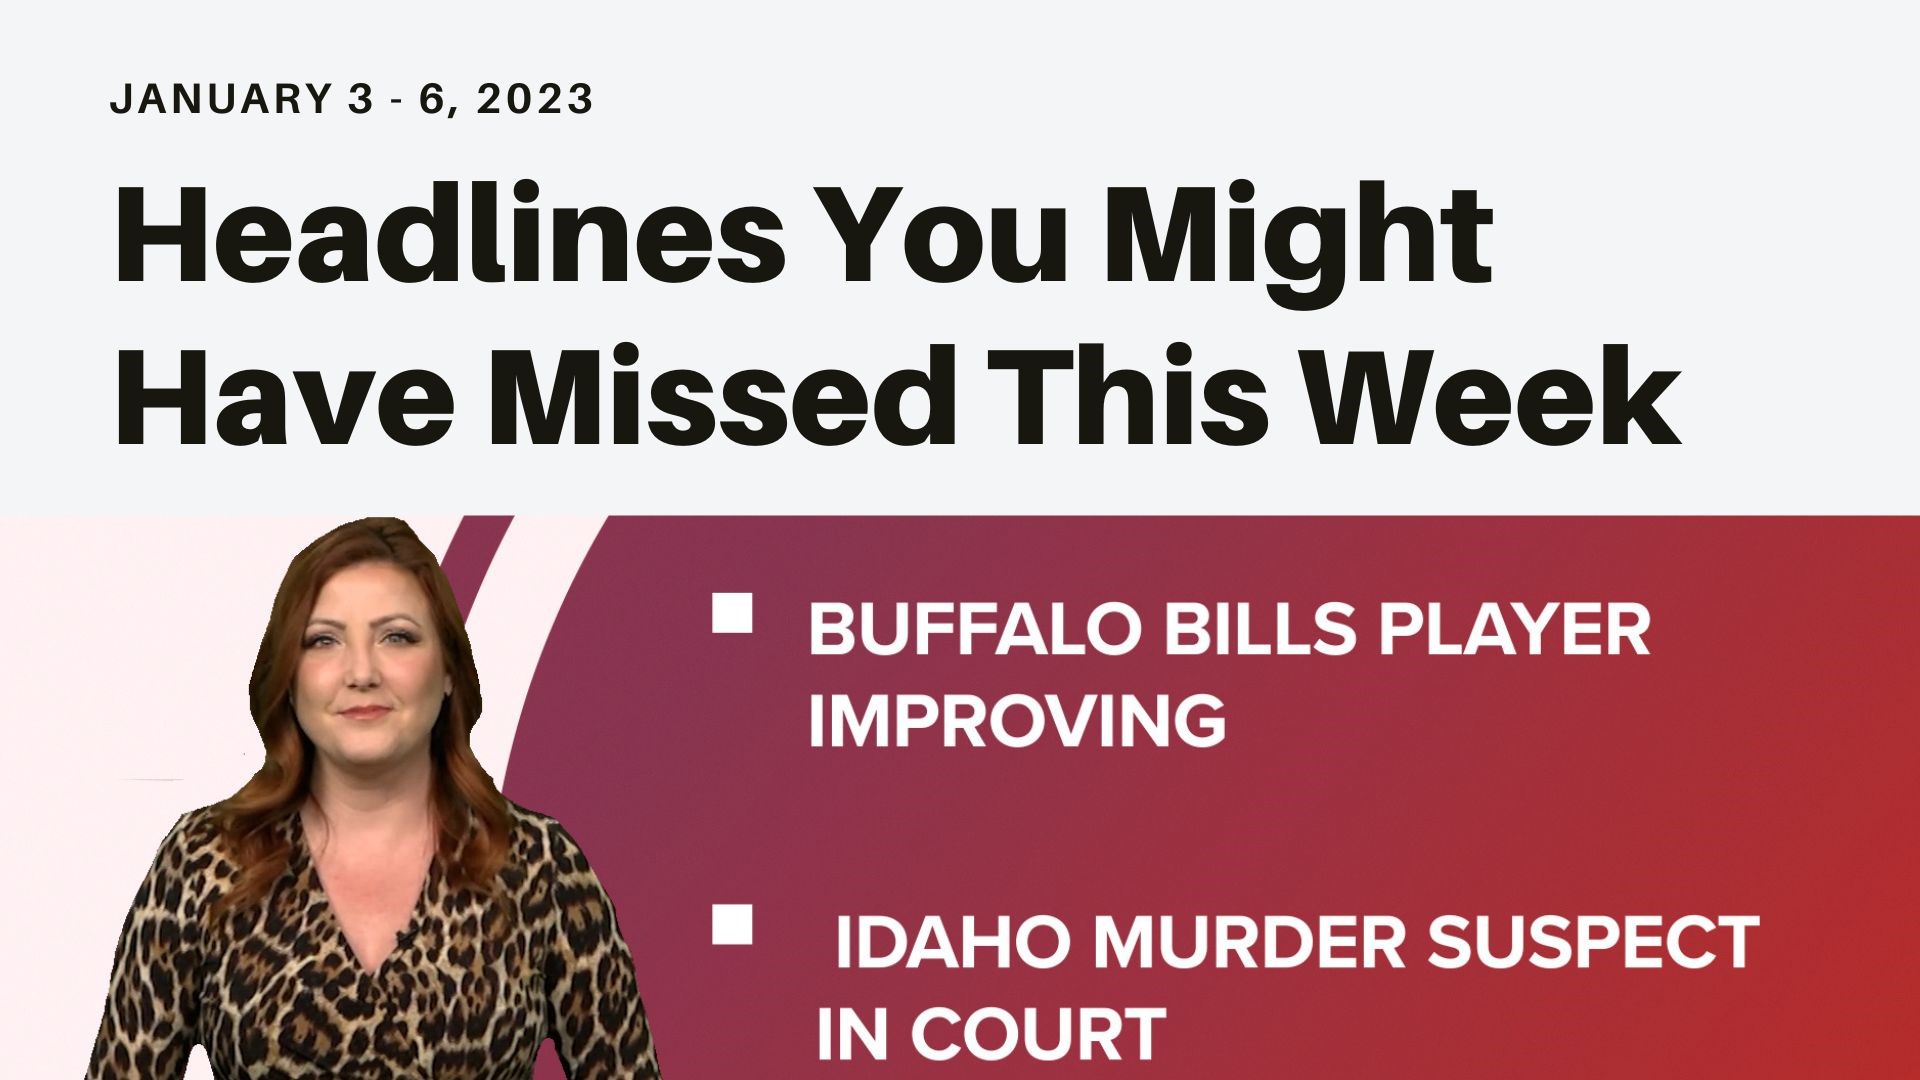 A look at the headlines you might have missed this week from the suspect in Idaho murders now charged to Pope Benedict XVI's funeral and abortion pill updates.